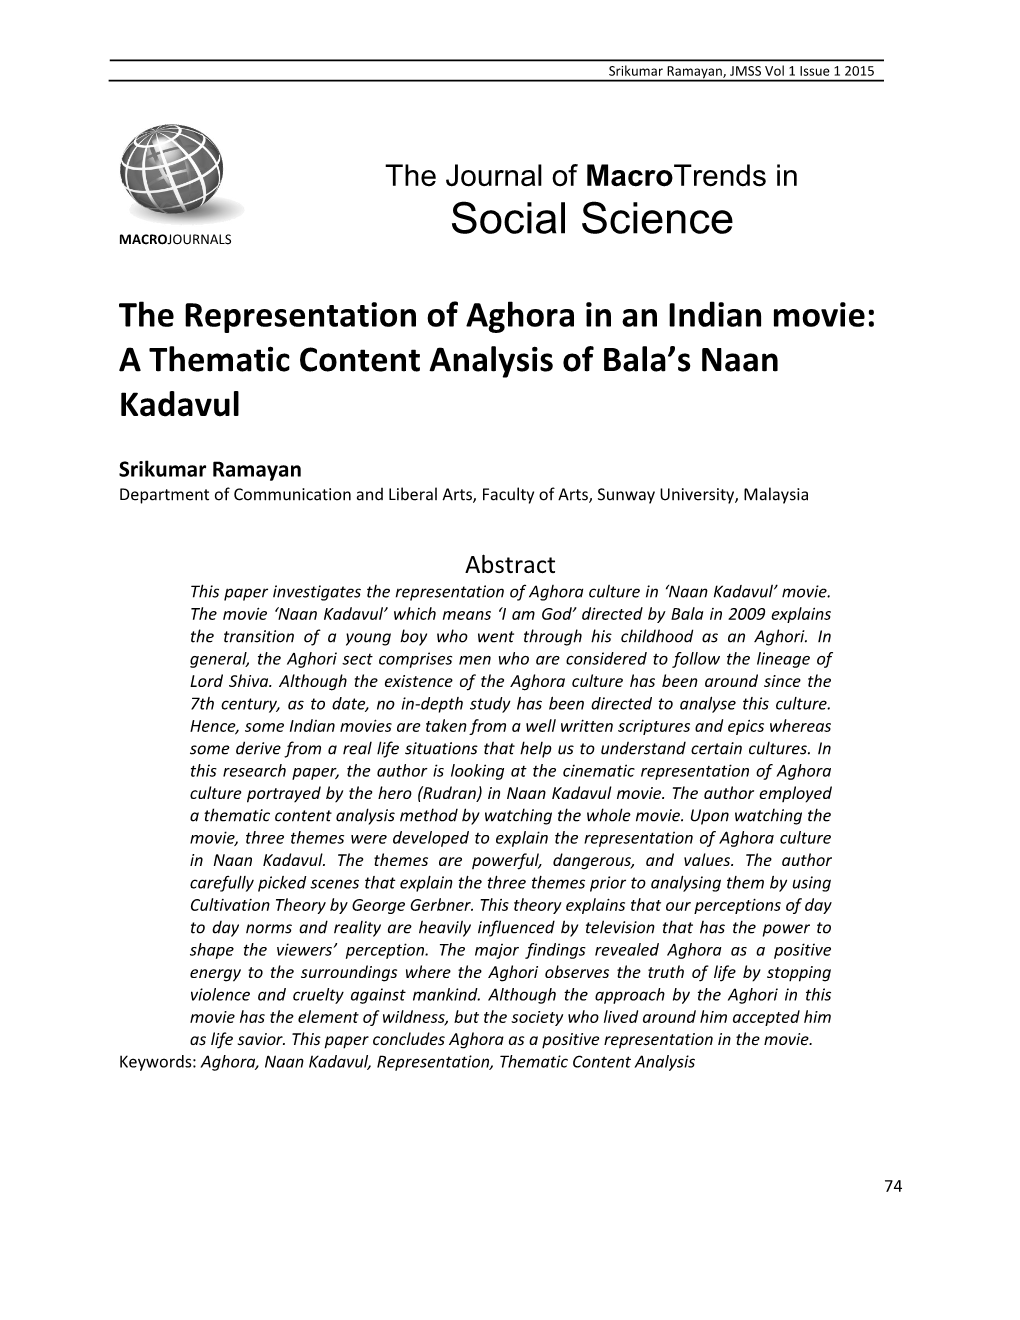 The Representation of Aghora in an Indian Movie: a Thematic Content Analysis of Bala’S Naan Kadavul